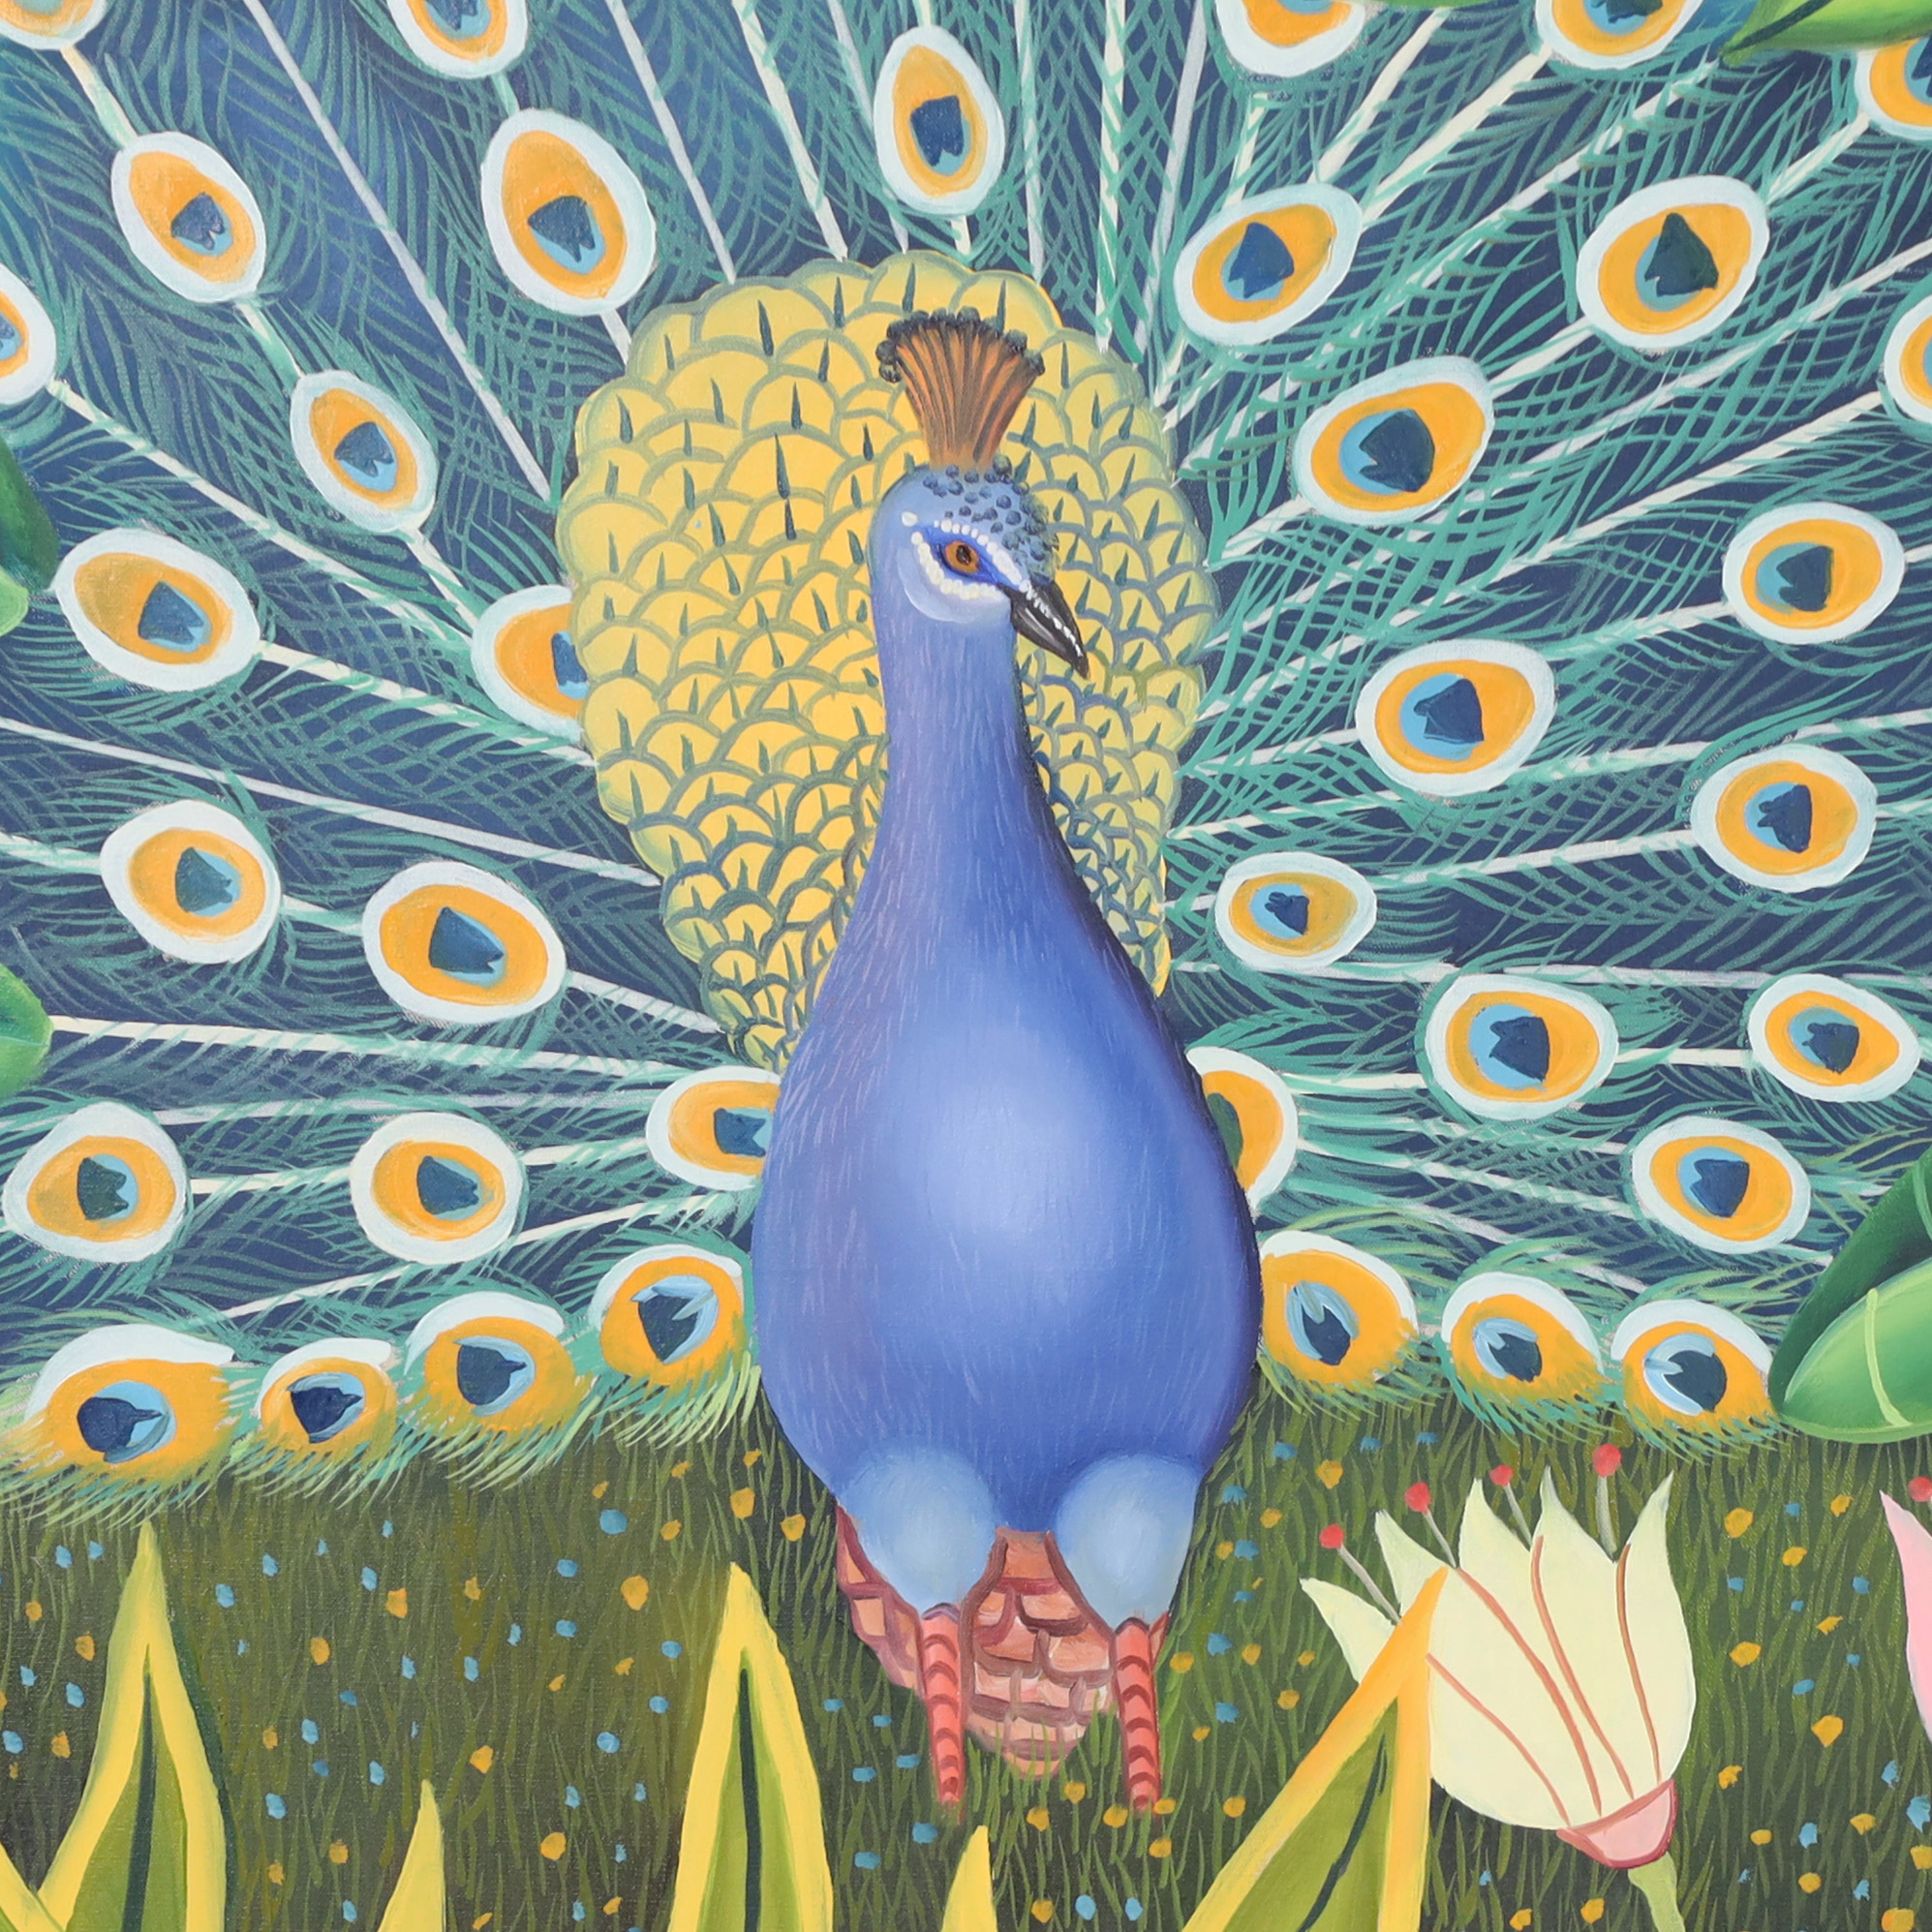 Vintage Painting on Canvas of a Peacock